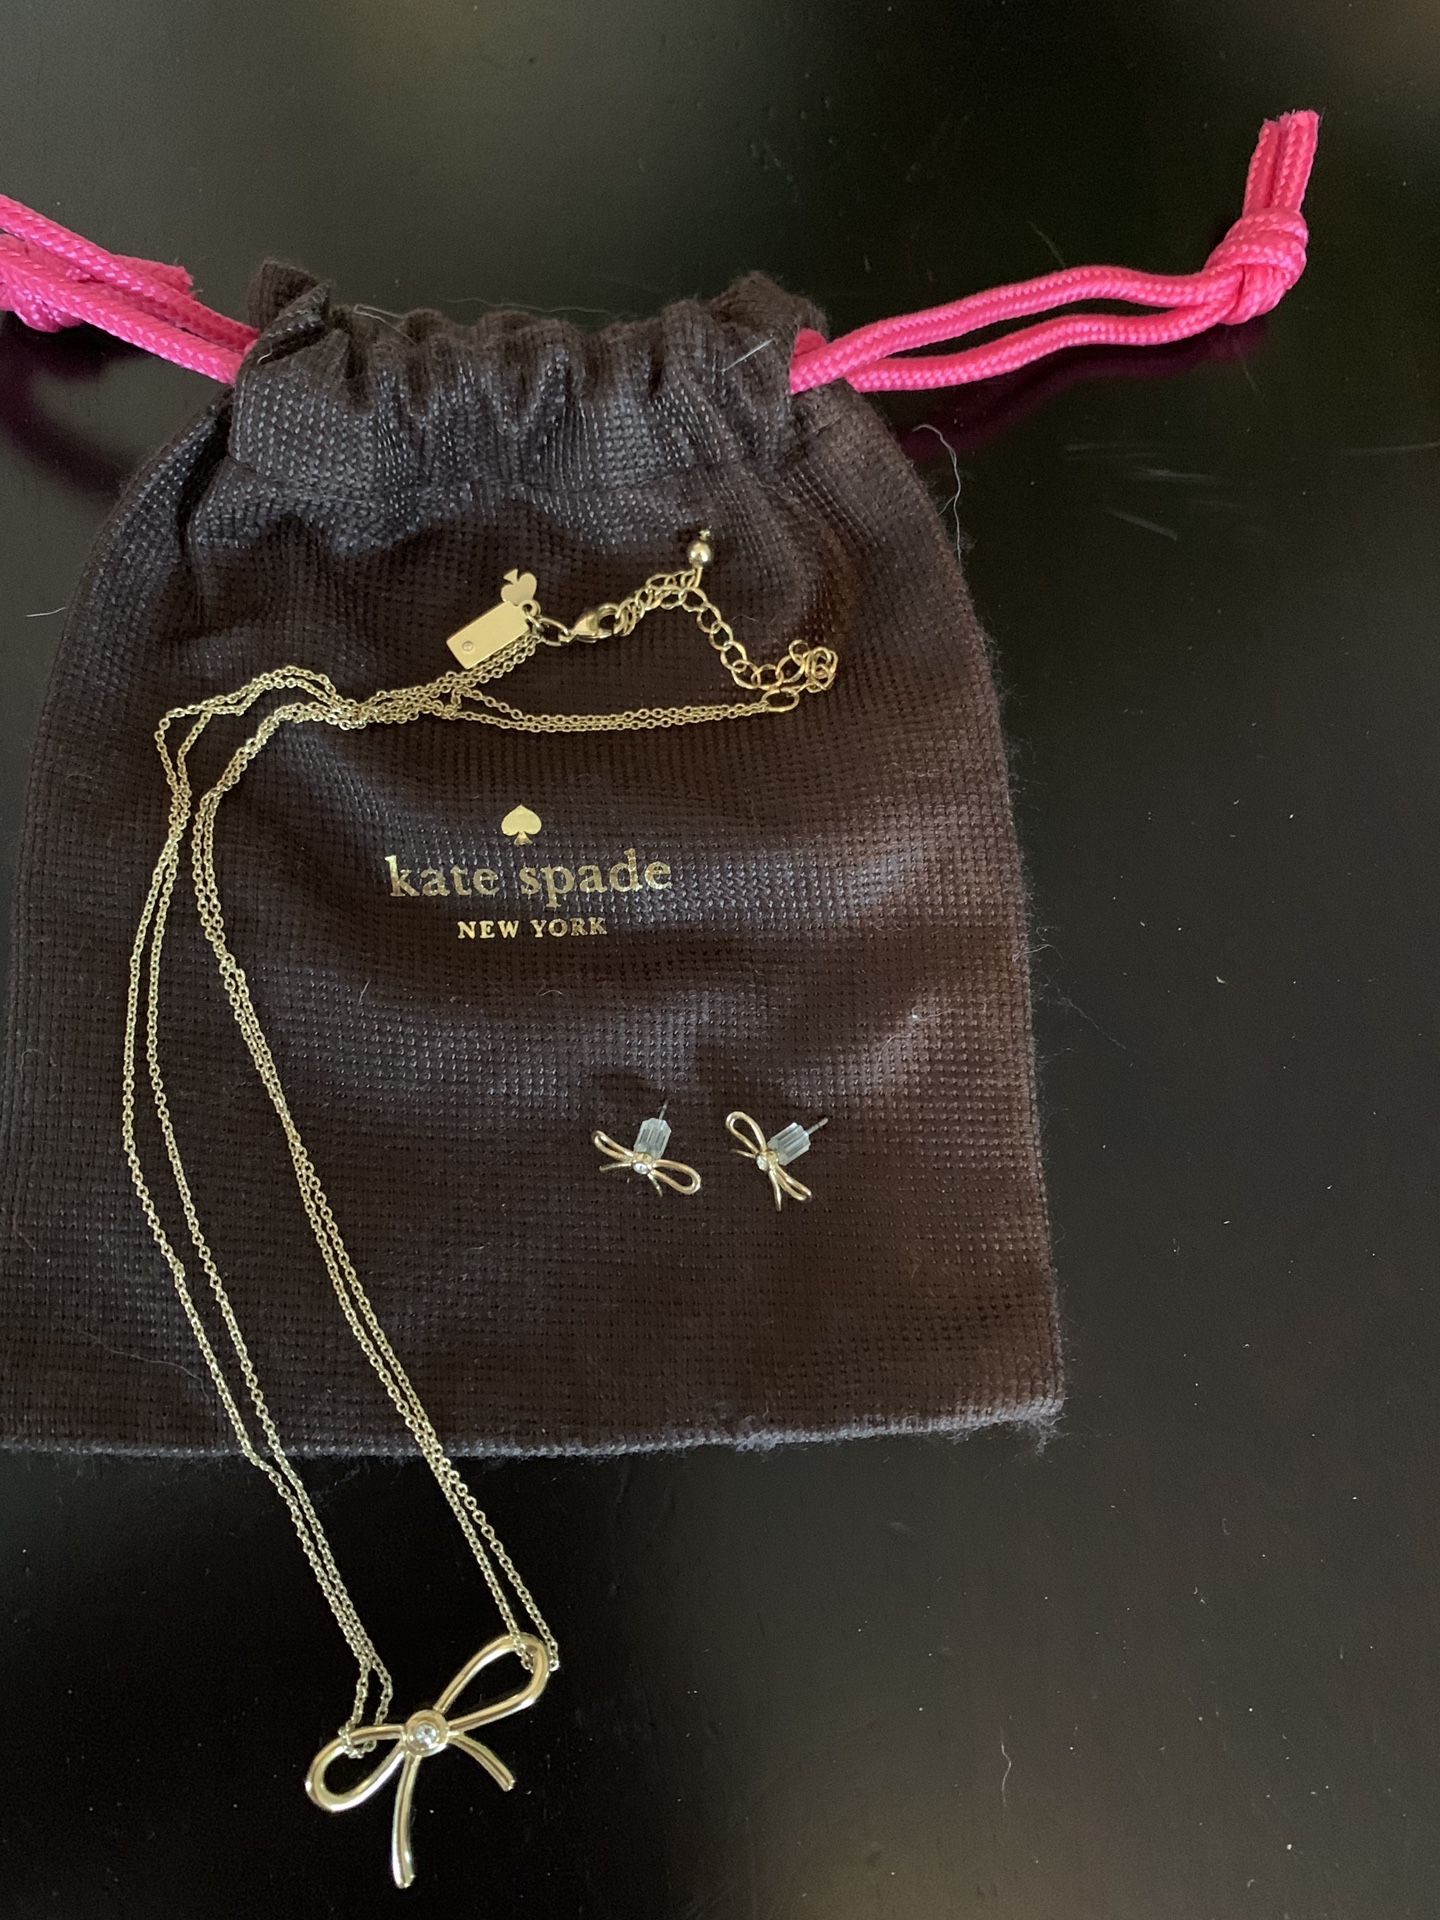 Kate Spade gold bow necklace and earring set